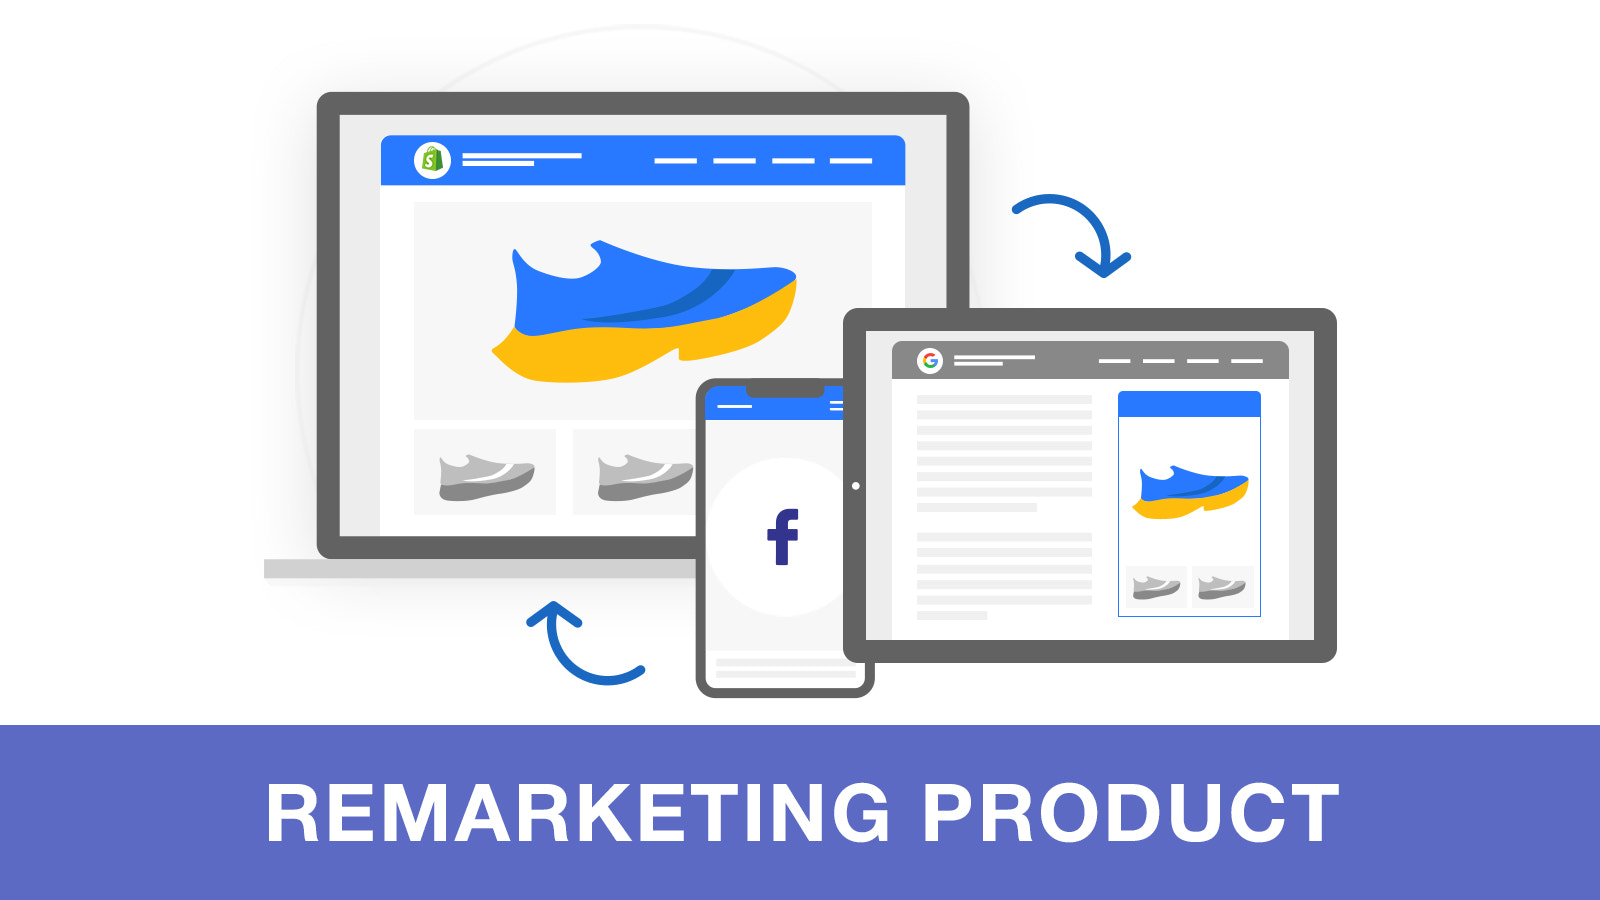 Synchronize all products for remarketing